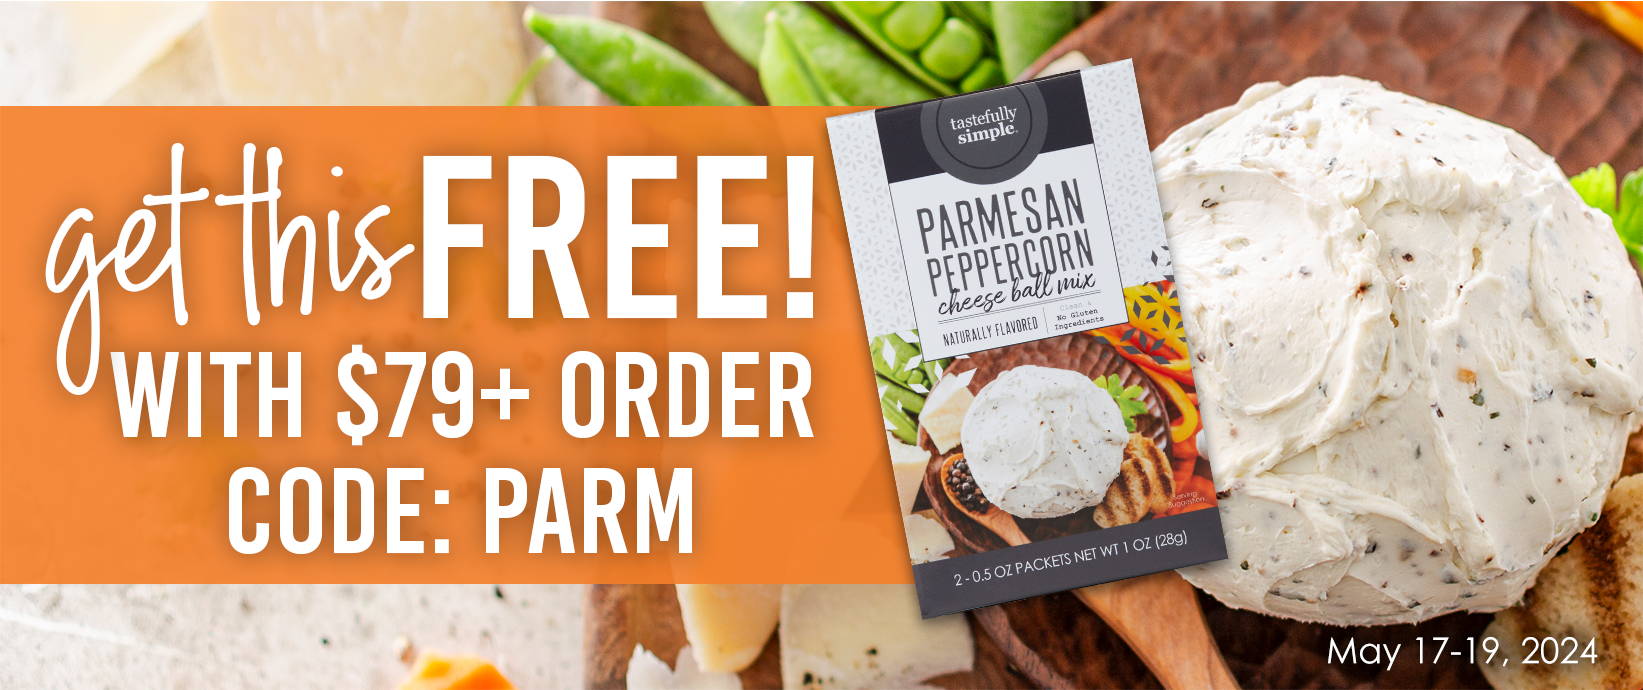 get this free! | parmesan peppercorn cheese ball mix